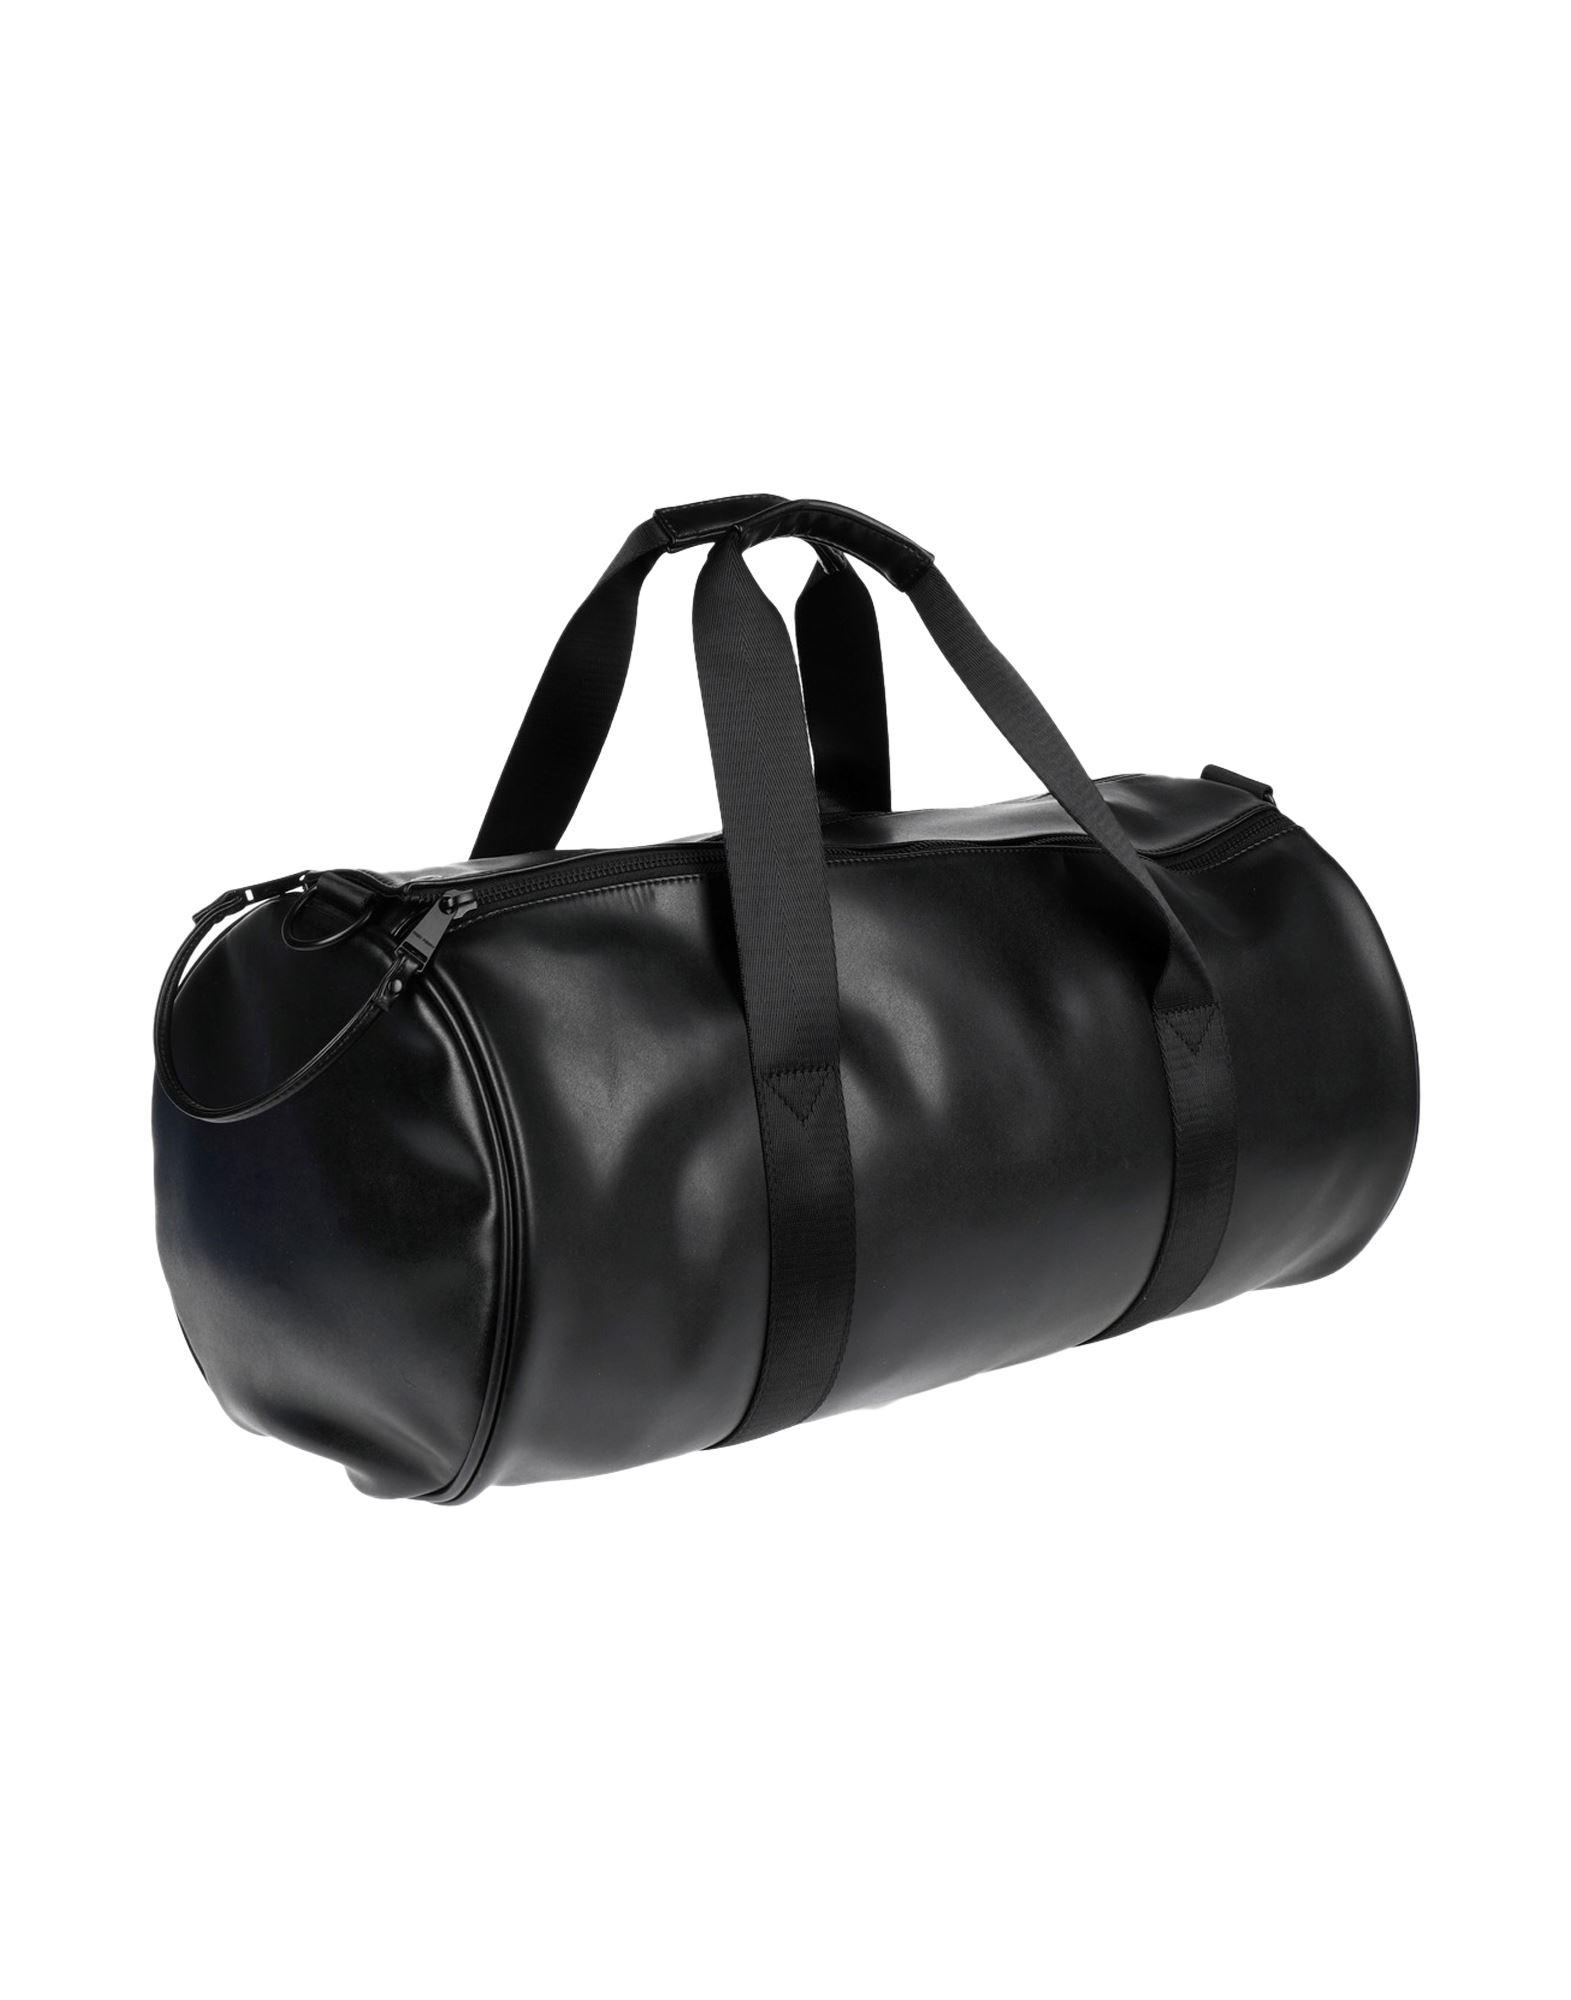 Fred Perry Travel Duffel Bag in Black for Men - Lyst